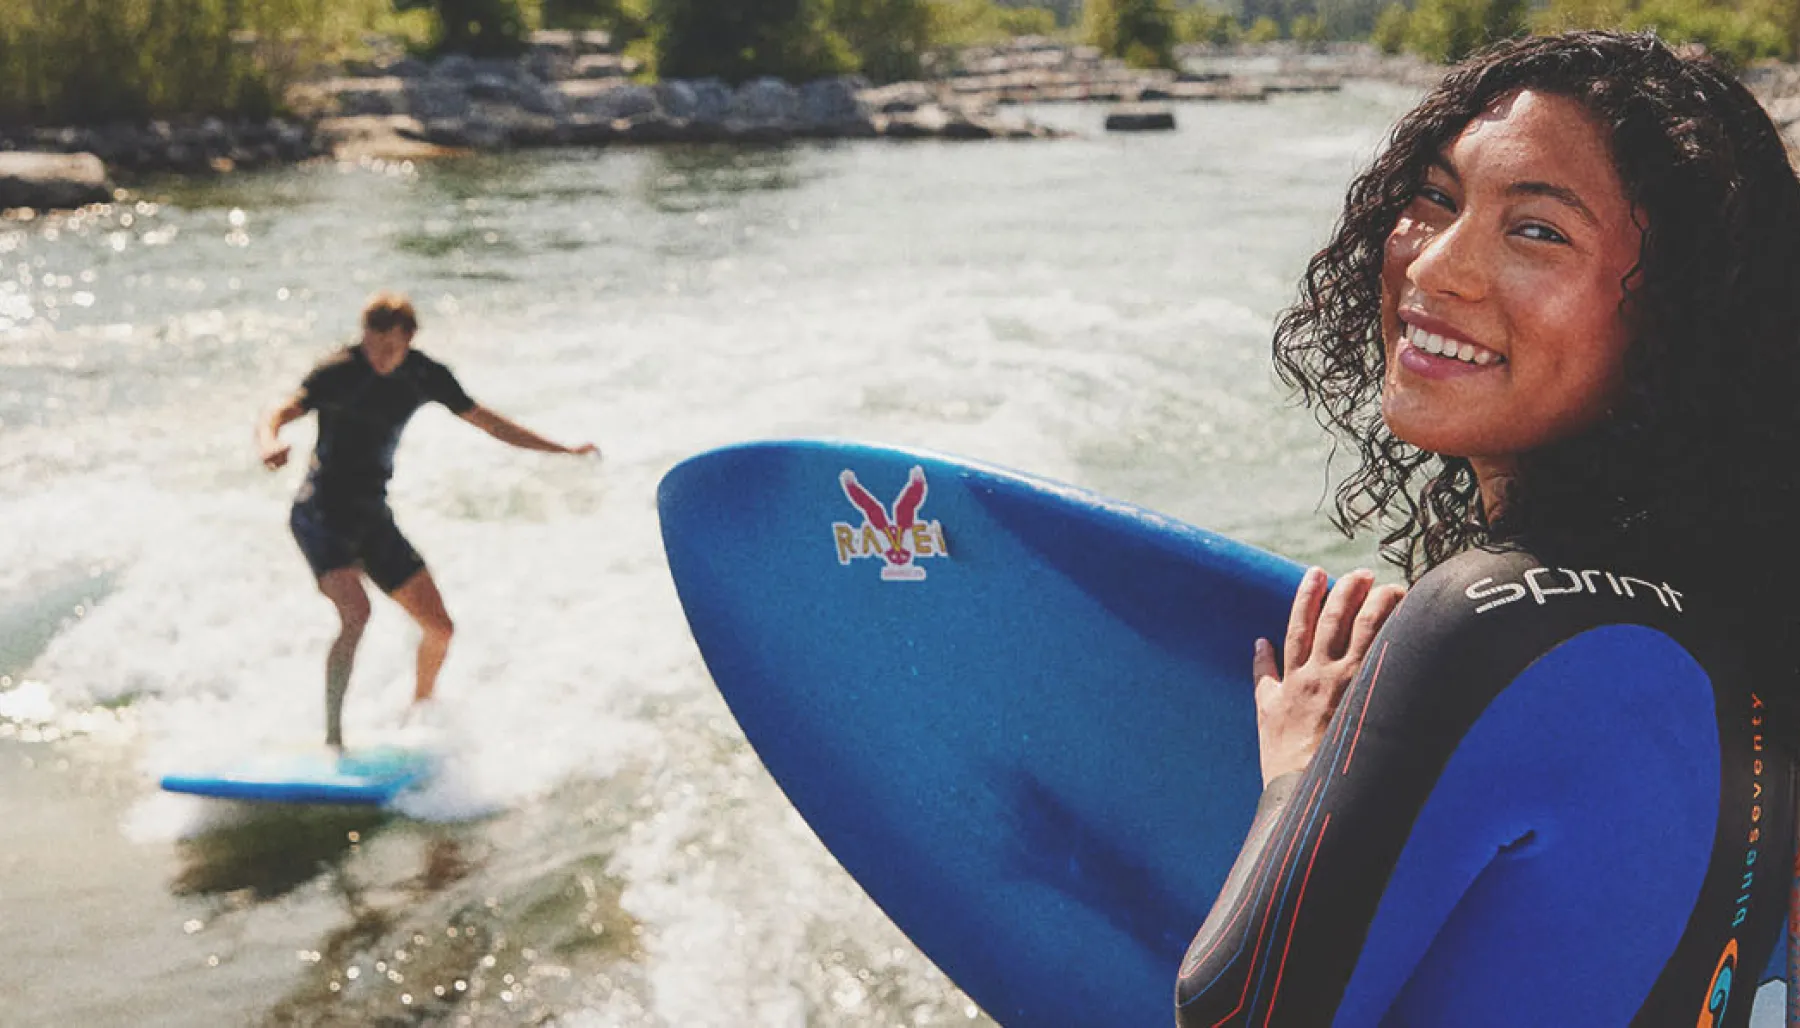 woman looks toward the camera holding a surfboard as a friend surfs Harvie Passage on the Bow River in the backgrounds